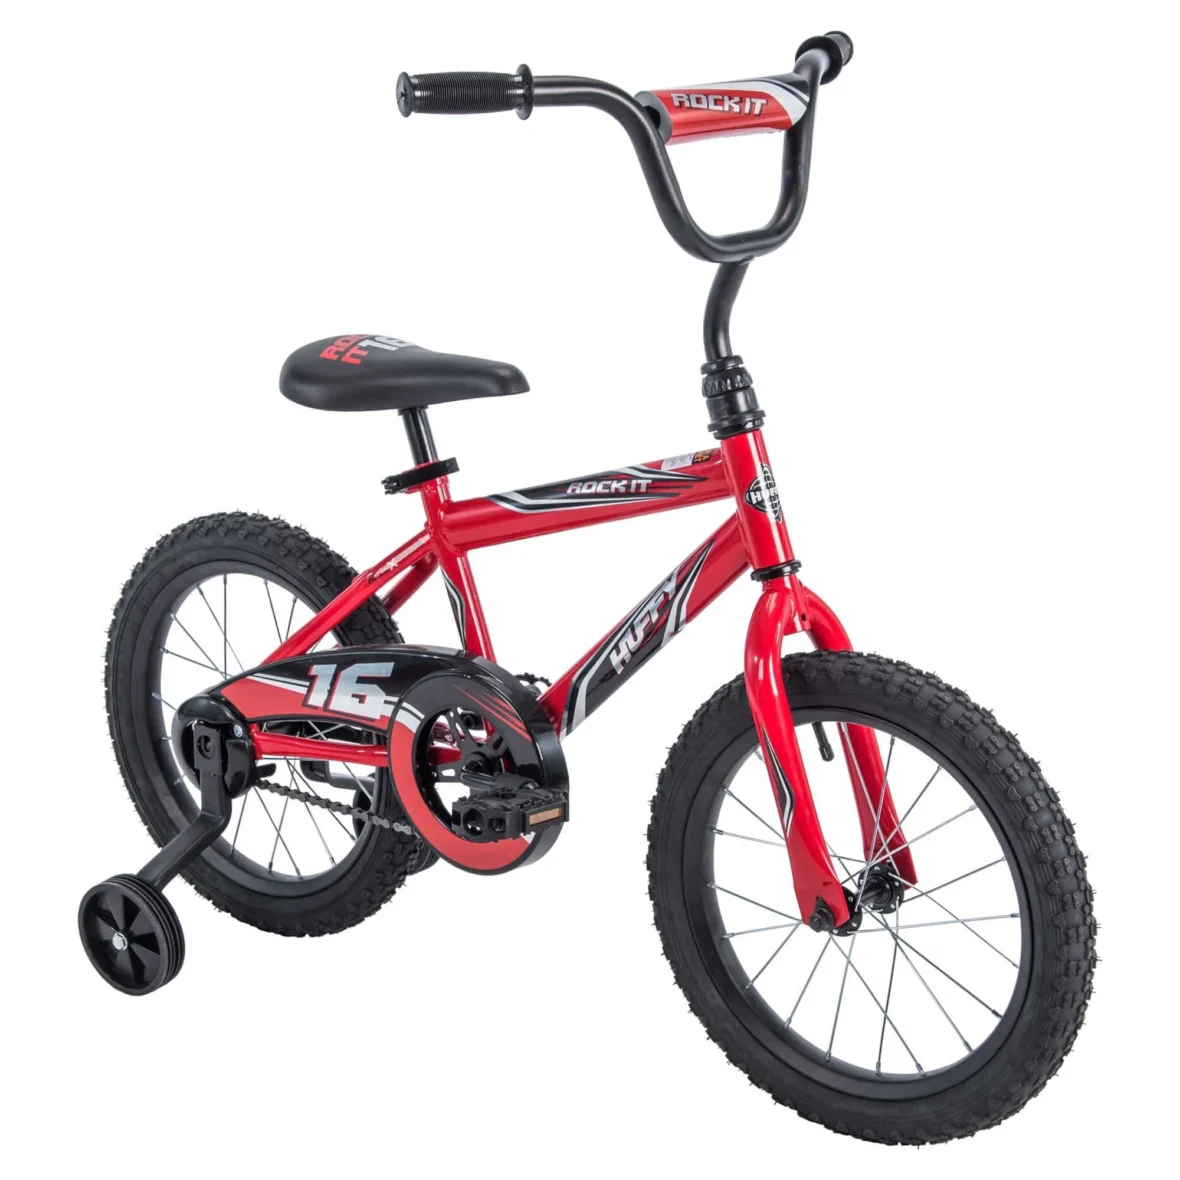 Huffy 16 in. Rock It Kids Bike for Boy Ages 4 and up, Child, Red